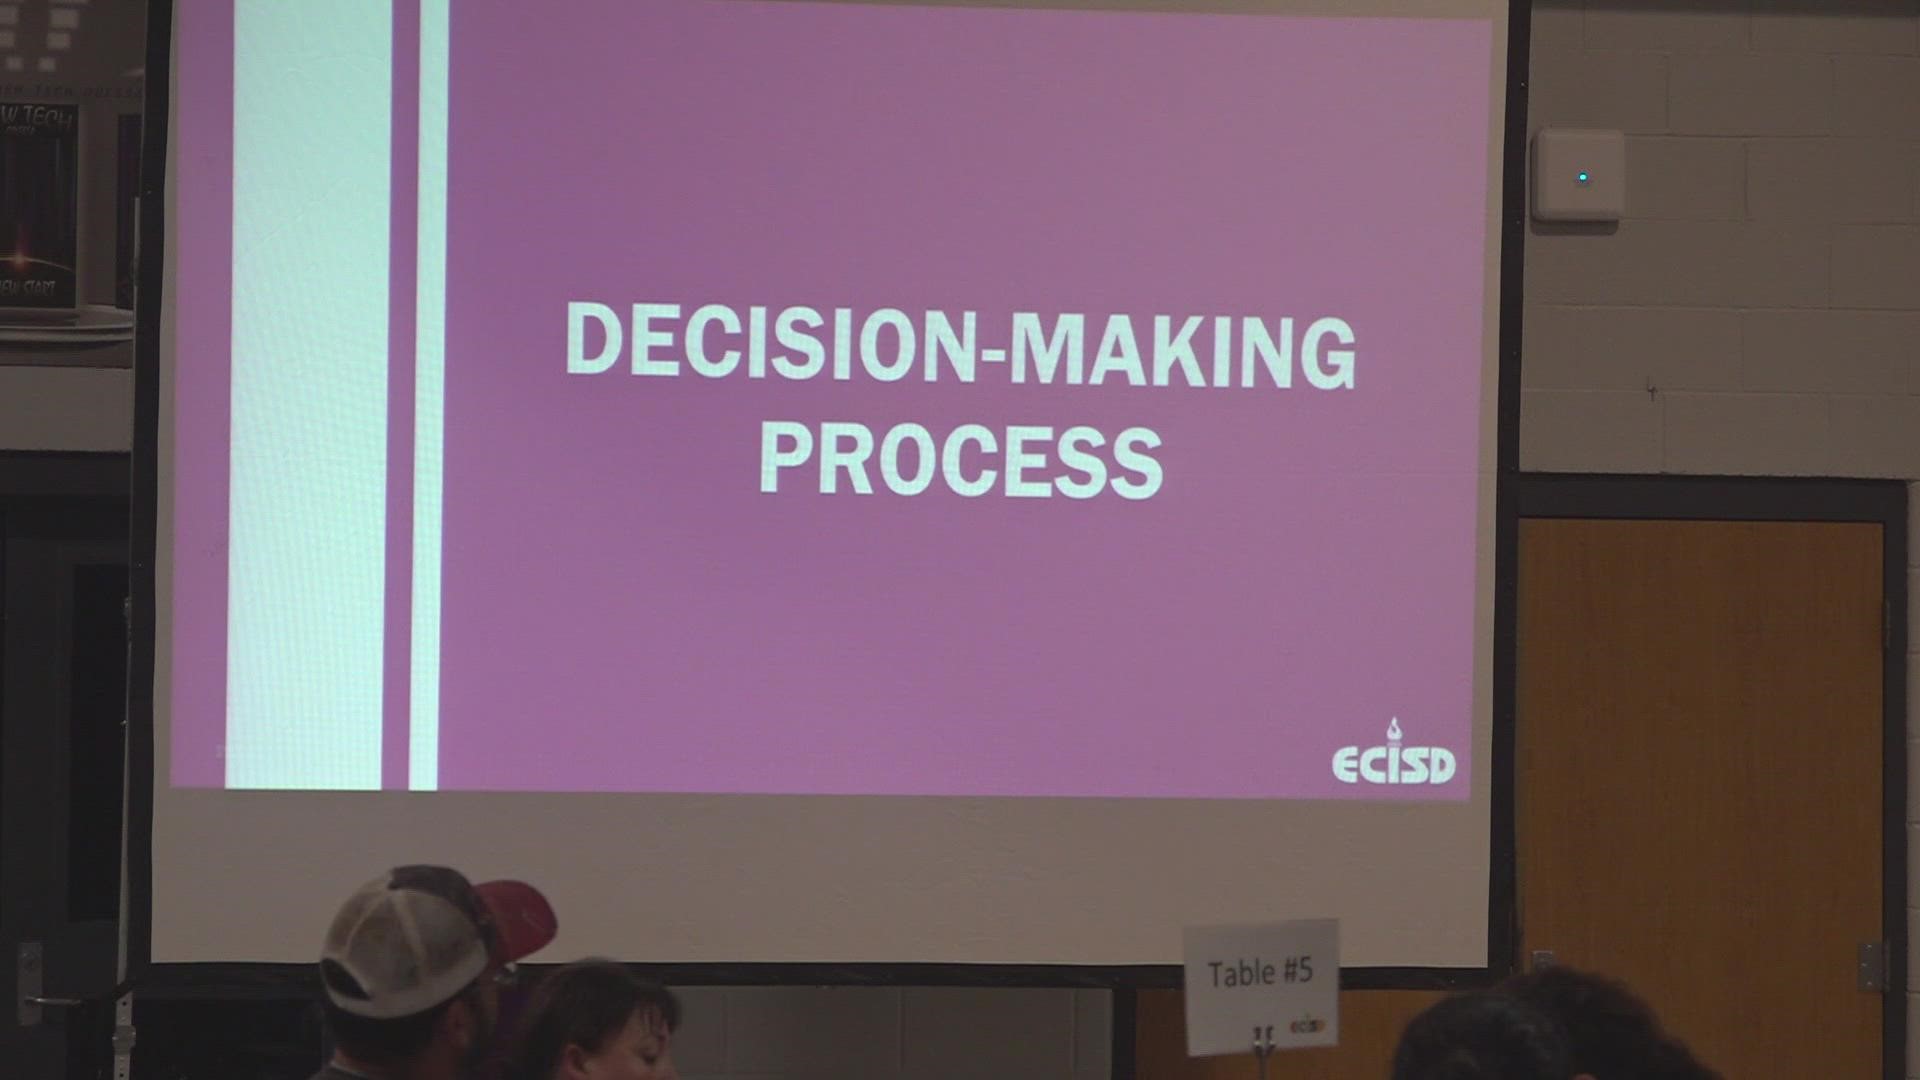 The process to create a bond package proposal will last months. ECISD Superintendent Dr. Scott Muri spoke on the challenges and goals involved.